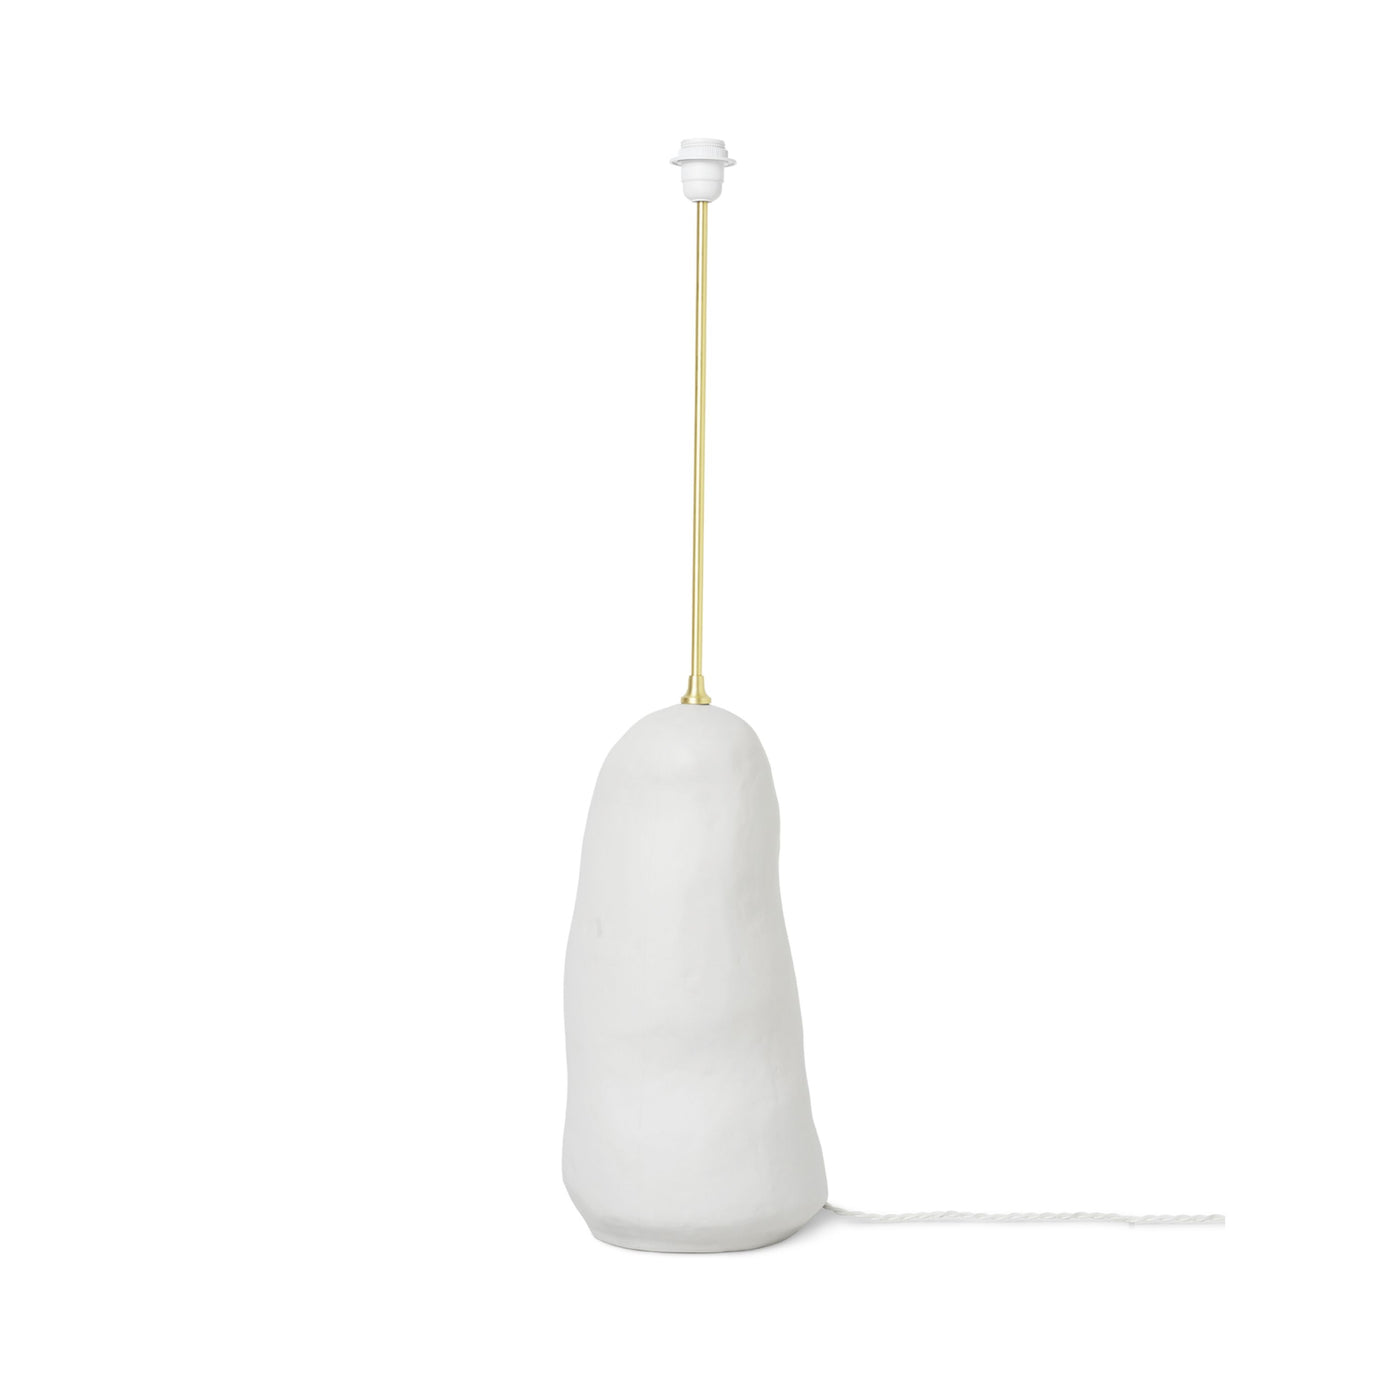 ferm living hebe lamp base large in off-white, available from someday designs. #colour_off-white